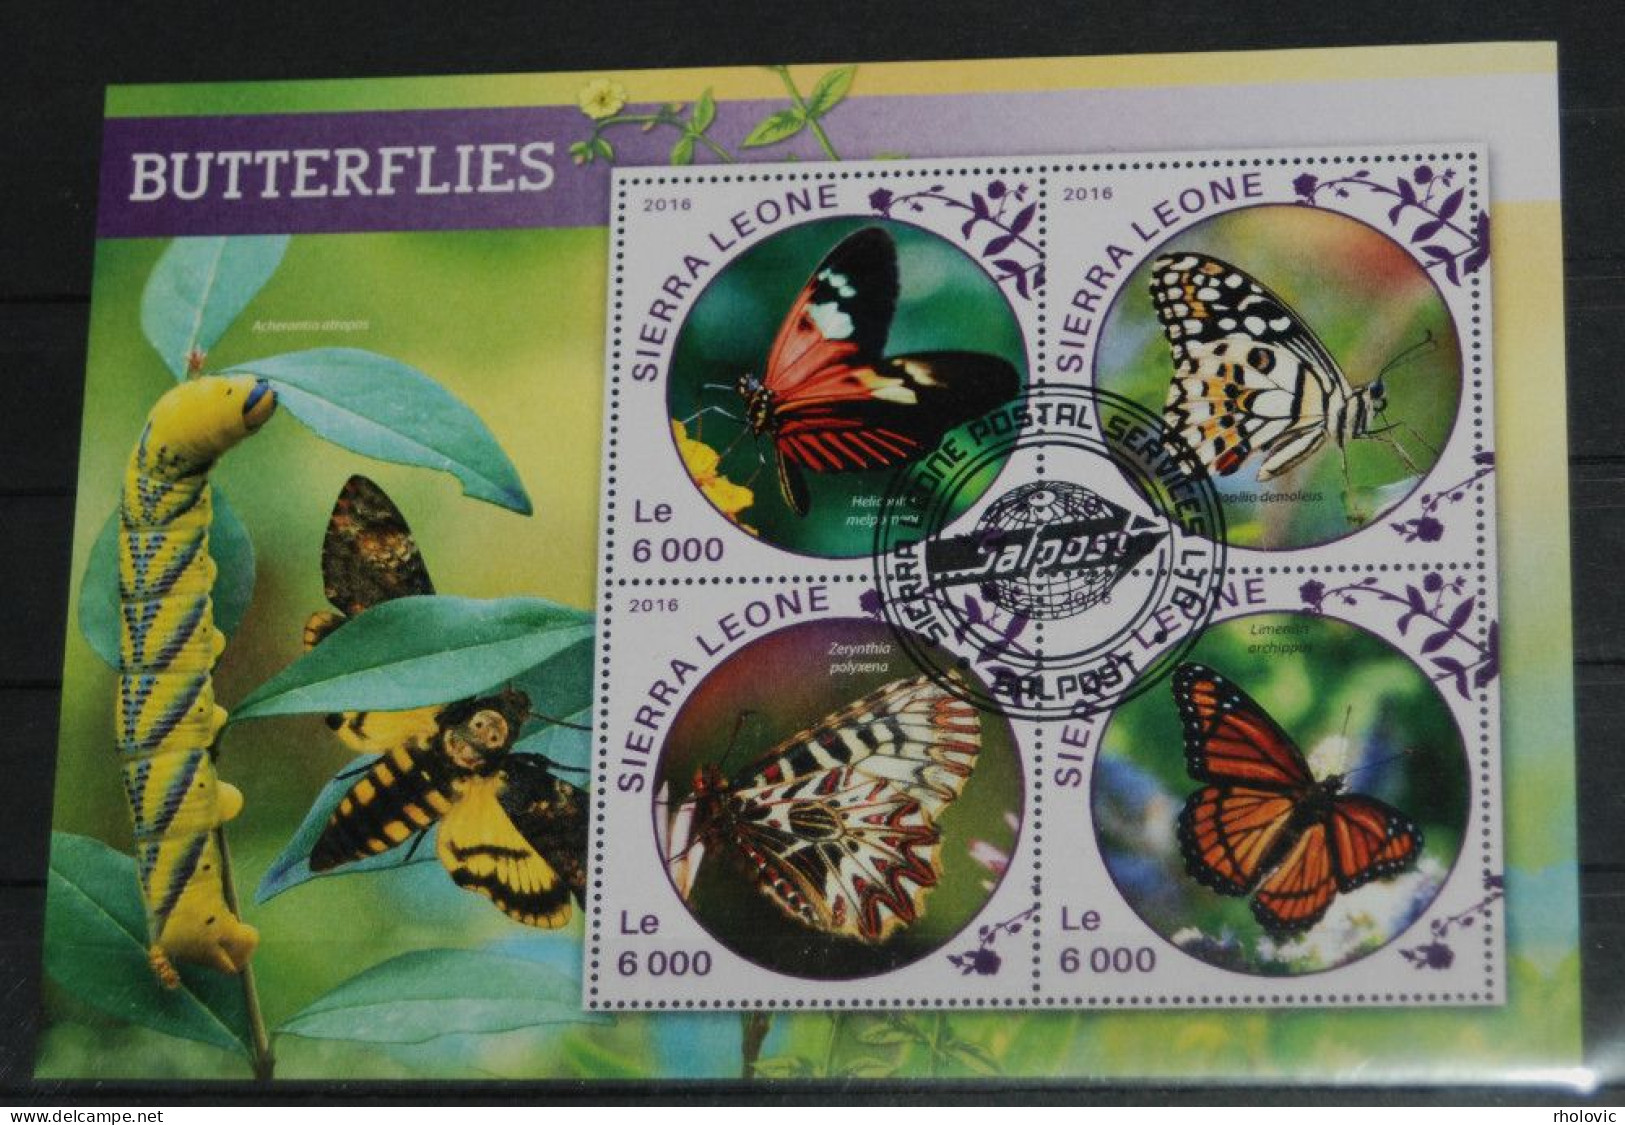 SIERRA LEONE 2016, Butterflies, Insects, Fauna, Mi #6813-6, Miniature Sheet, Used - Papillons